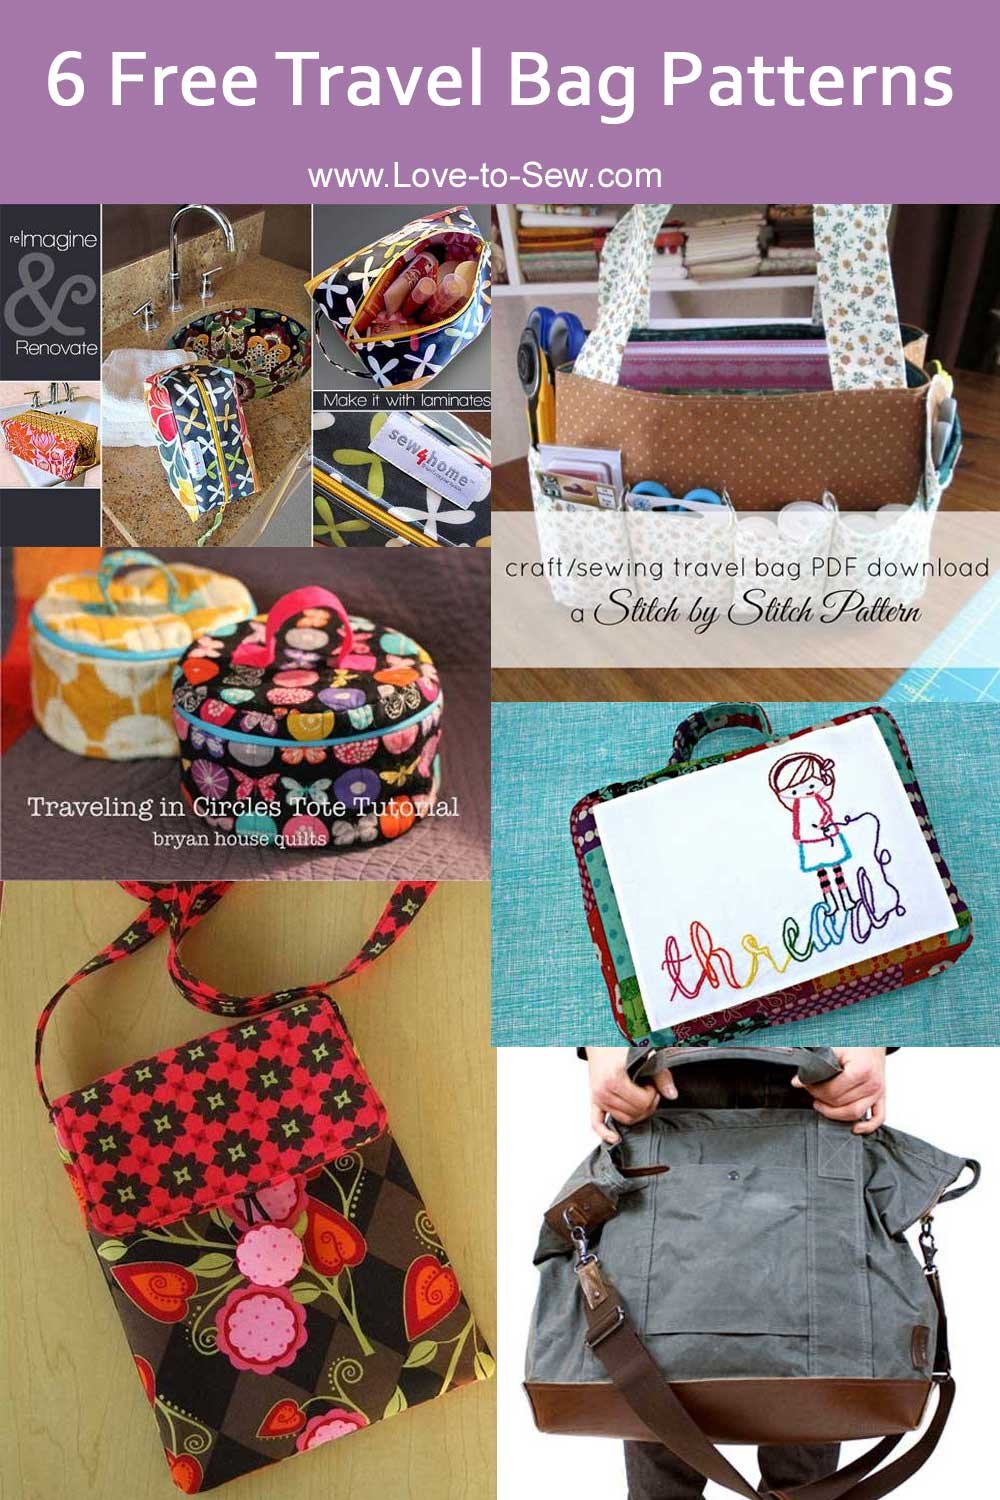 6 Free Travel Bag Patterns - Love to Stitch and Sew